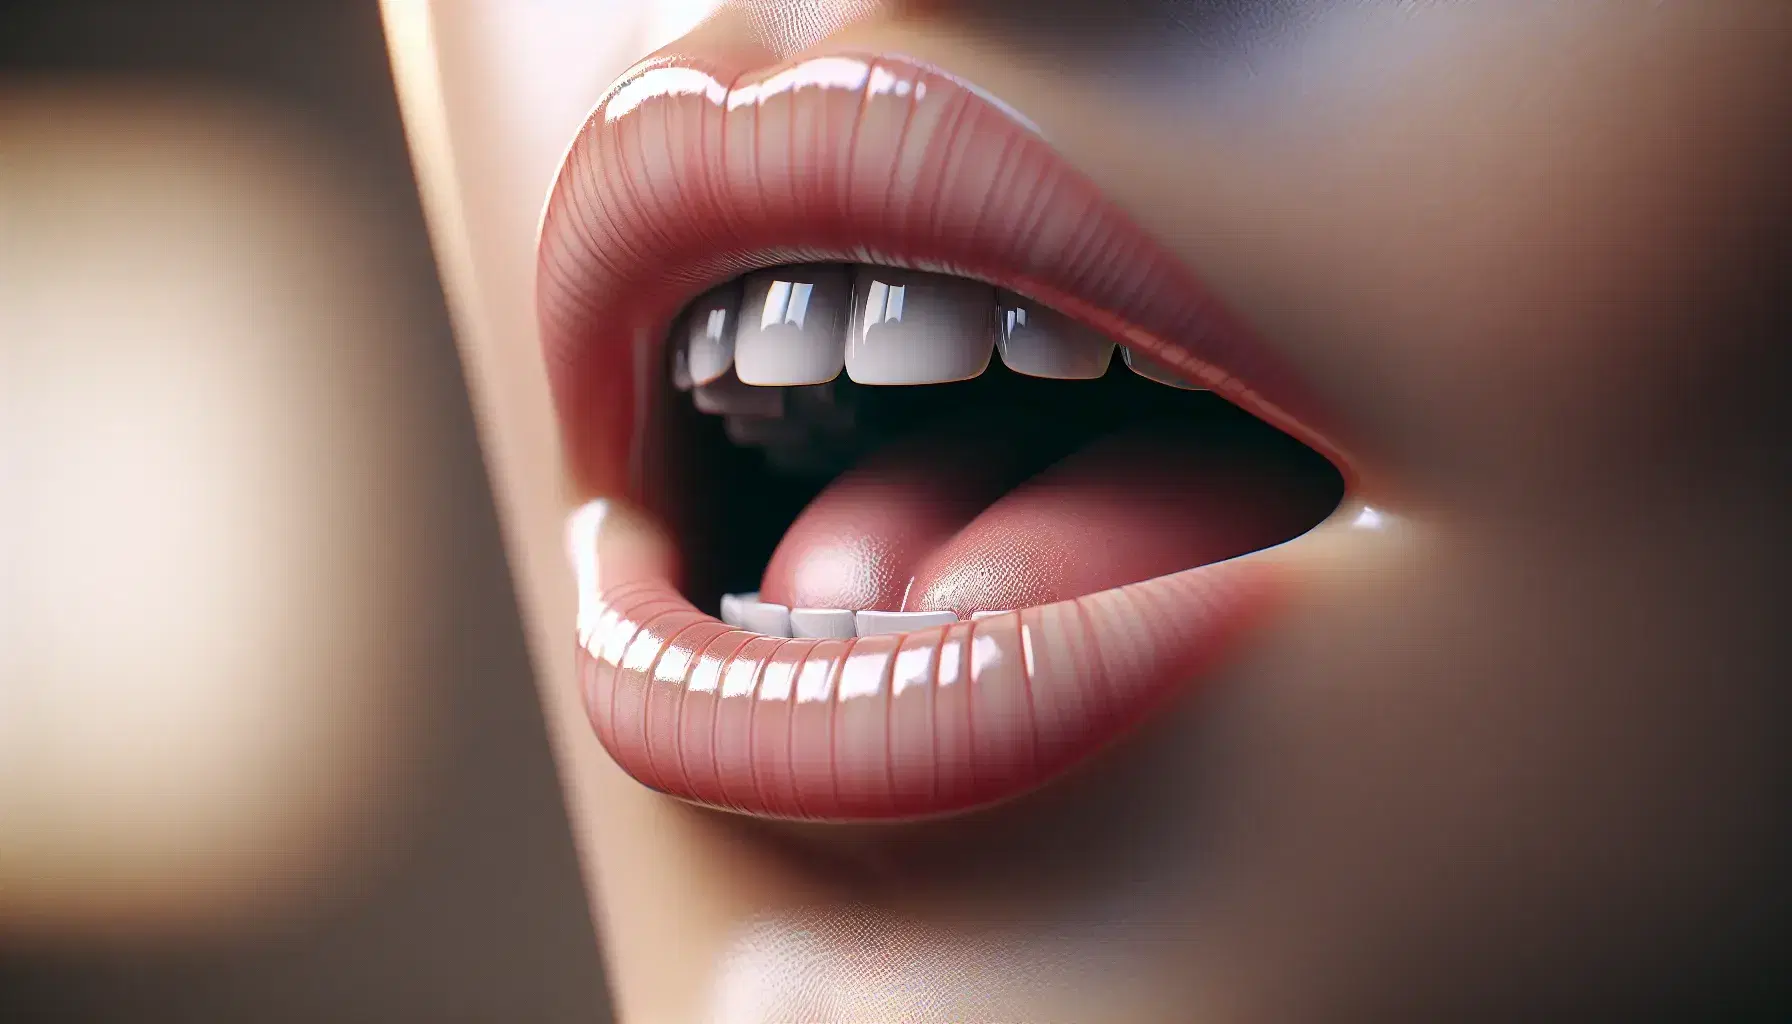 Close-up view of a human mouth with slightly parted lips and visible teeth during the articulation of a soft 'g' sound, against a blurred background.